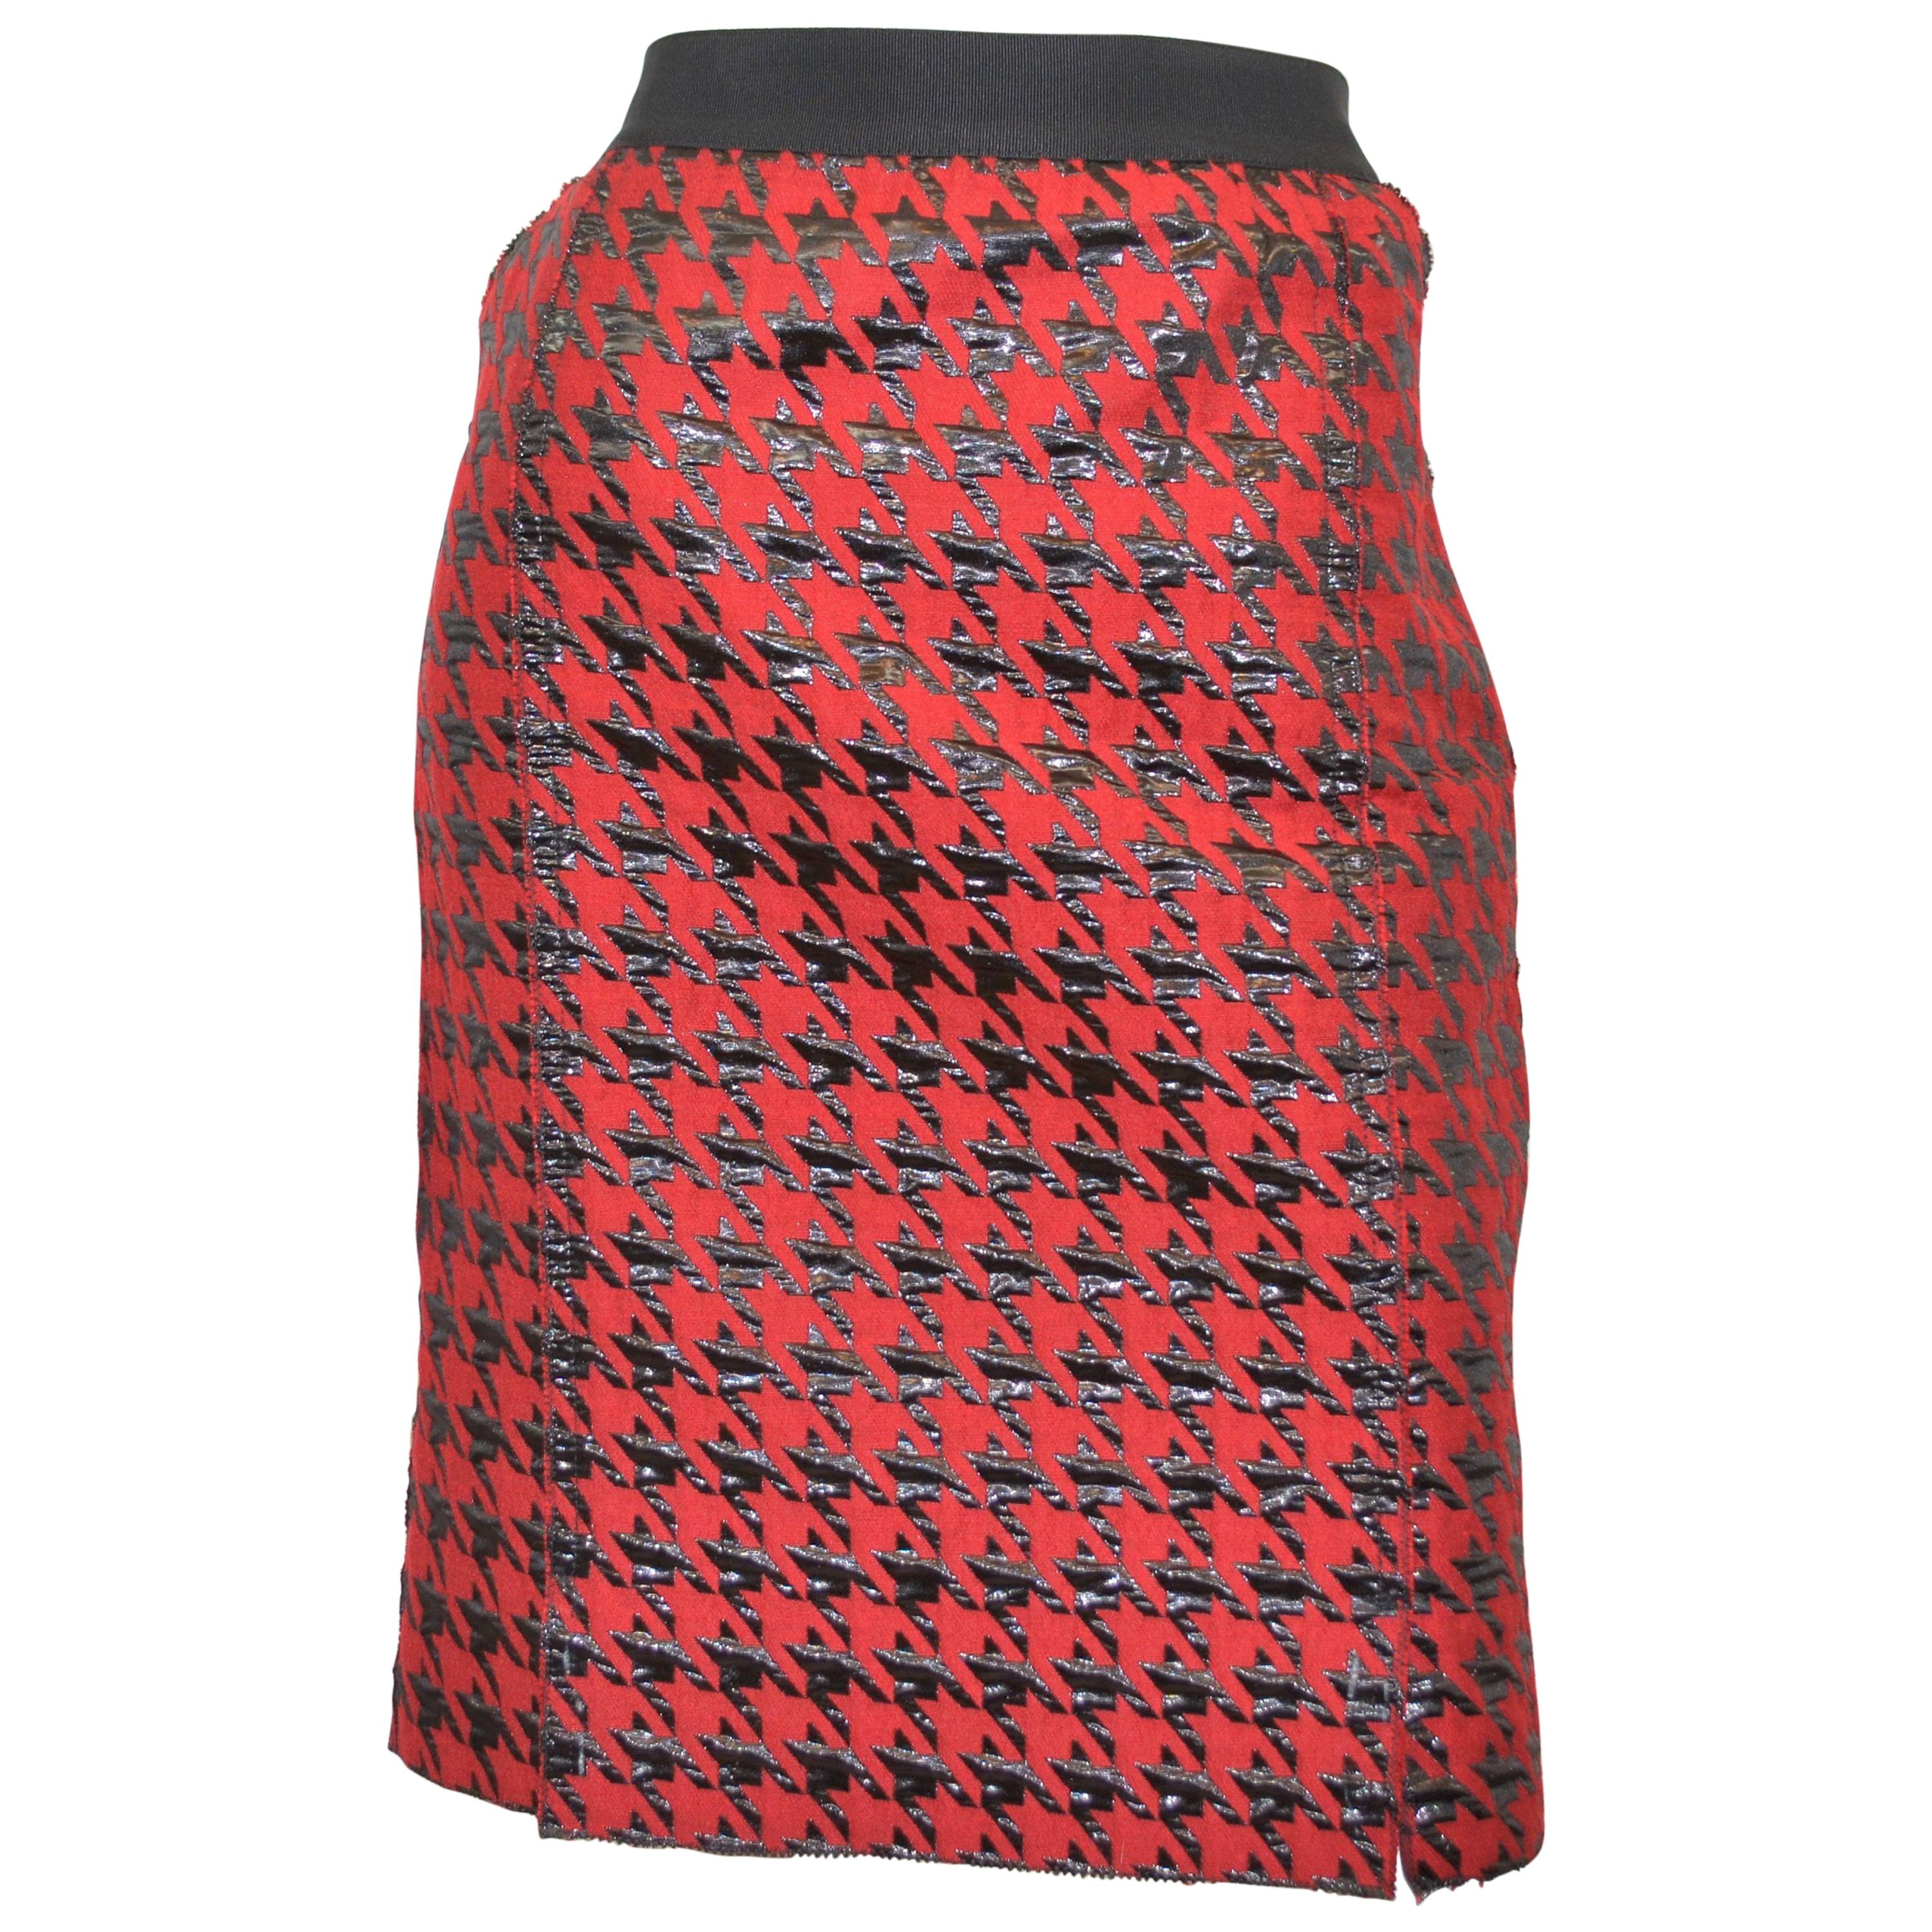 D & G Red Houndstooth Skirt